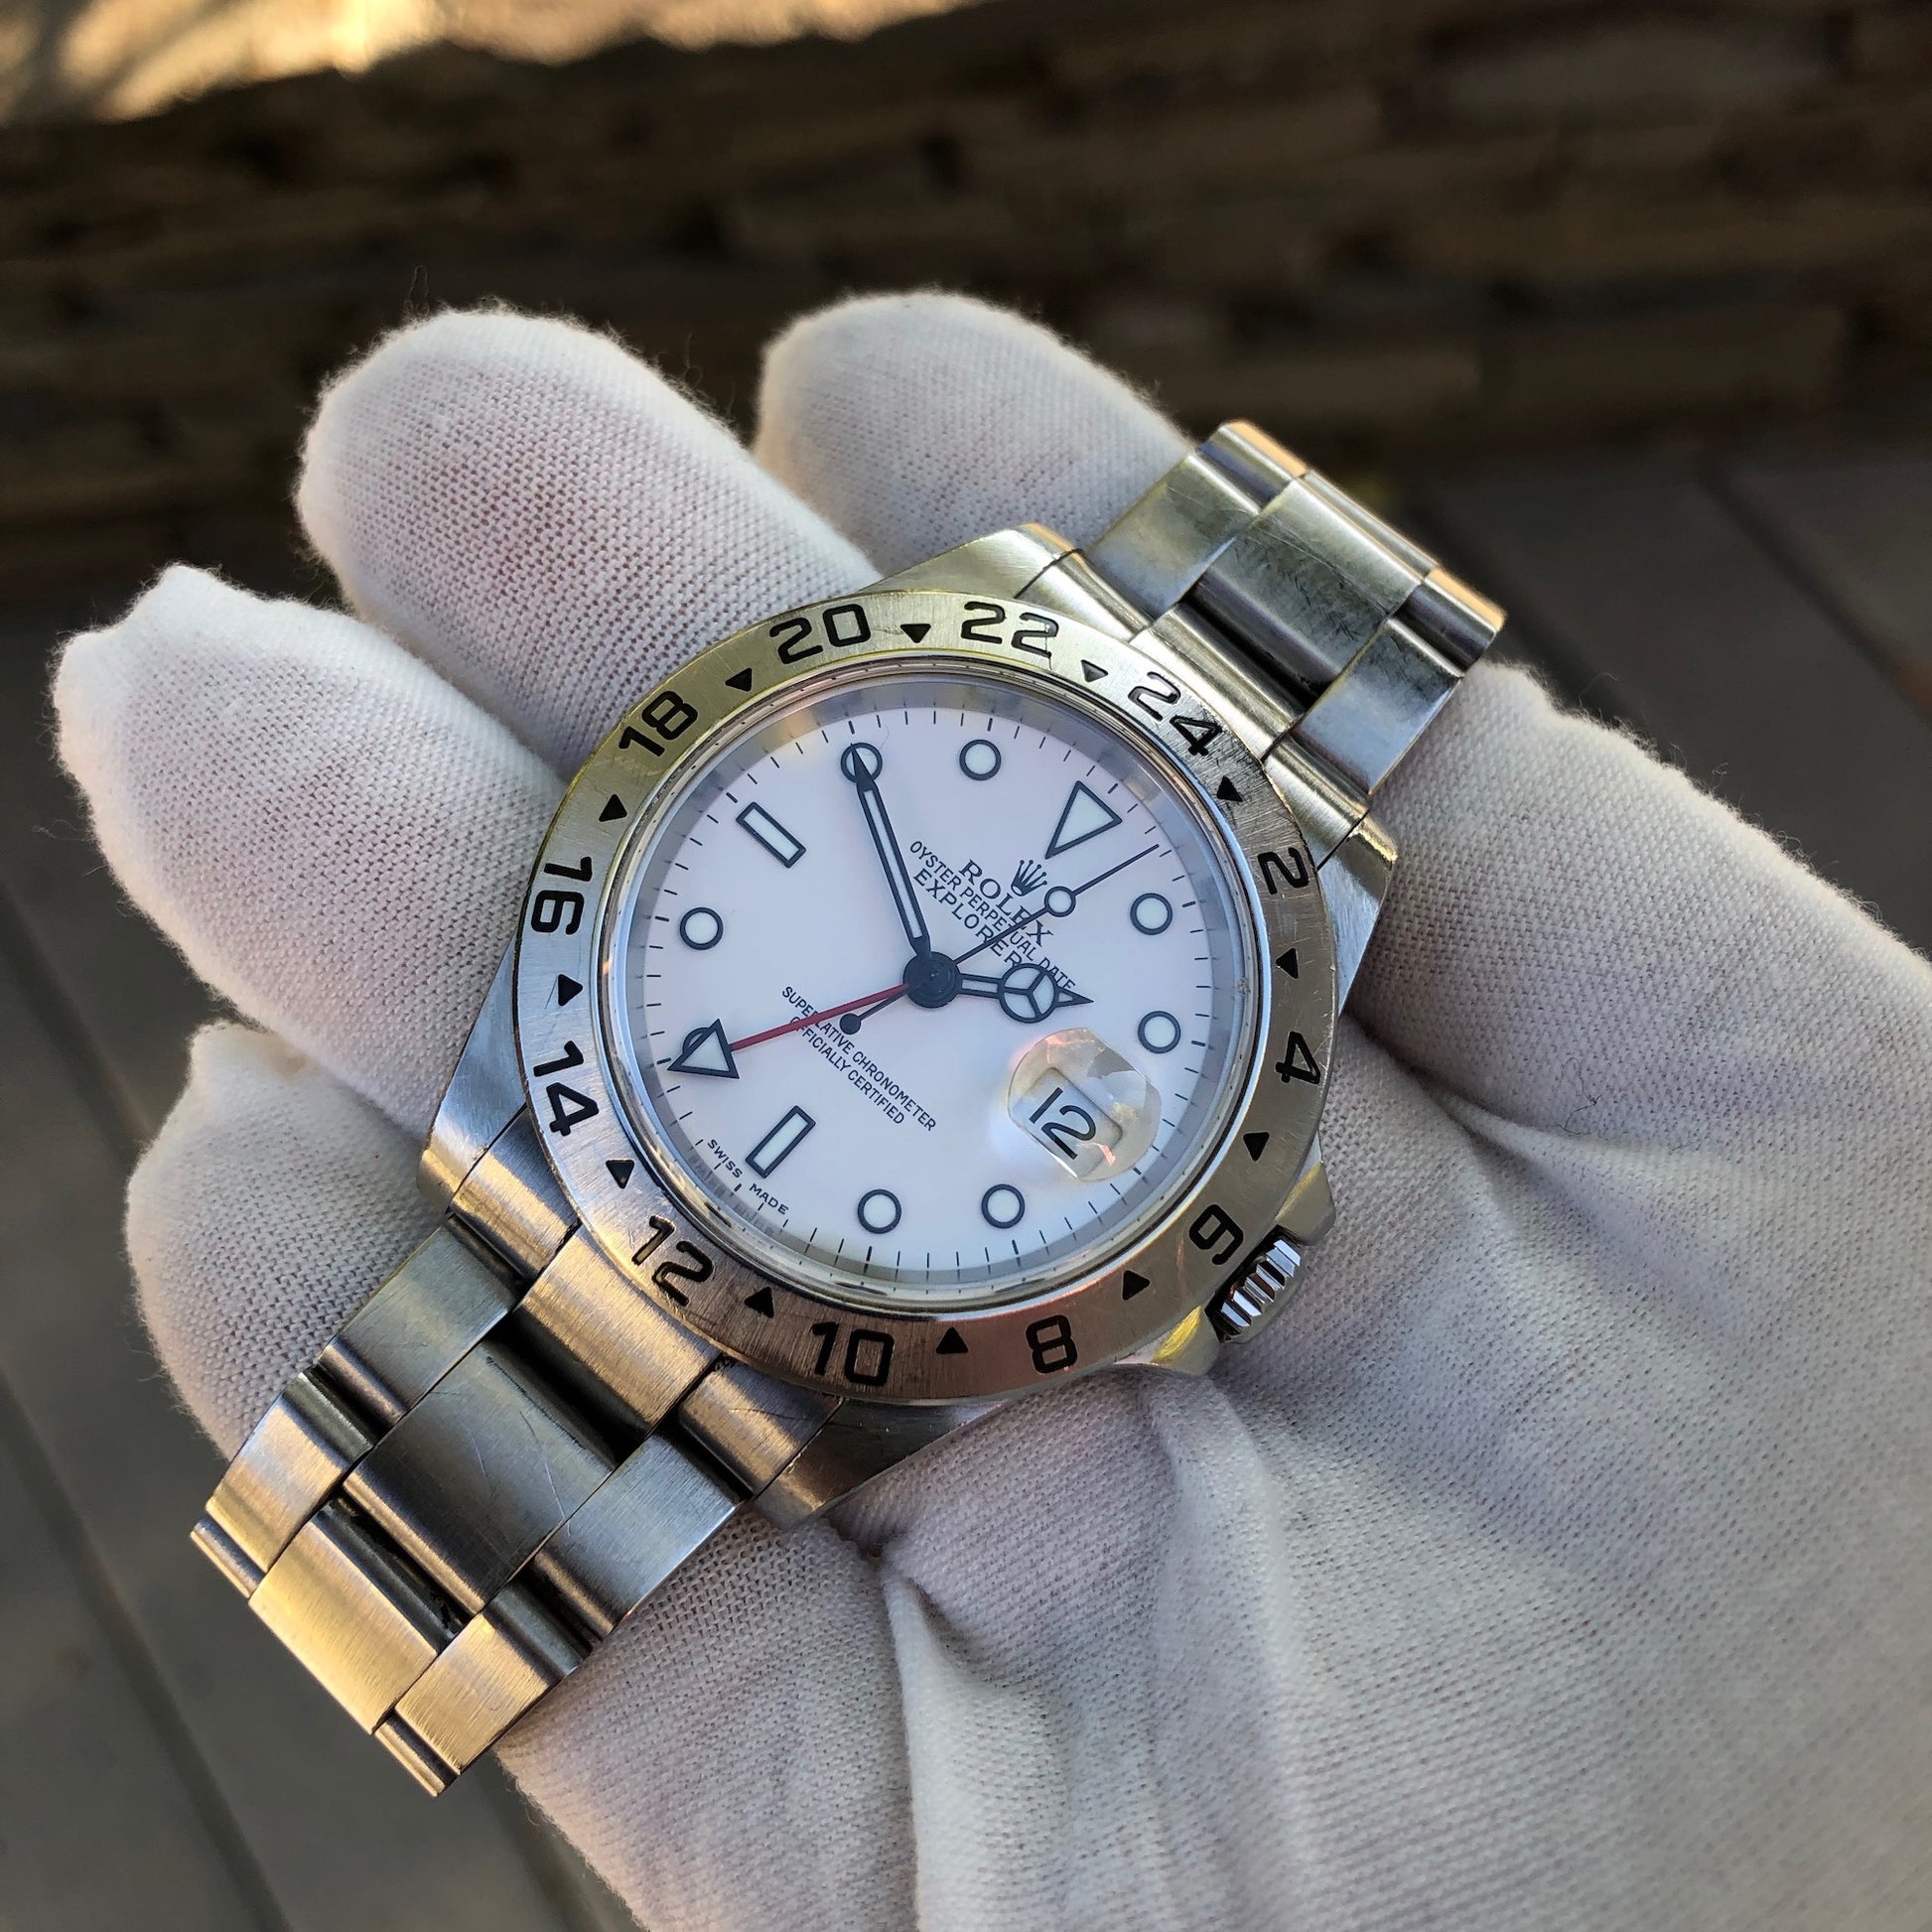 Rolex Explorer II 16570 White Stainless Steel GMT Oyster D Serial Wristwatch Circa 2005 - Hashtag Watch Company